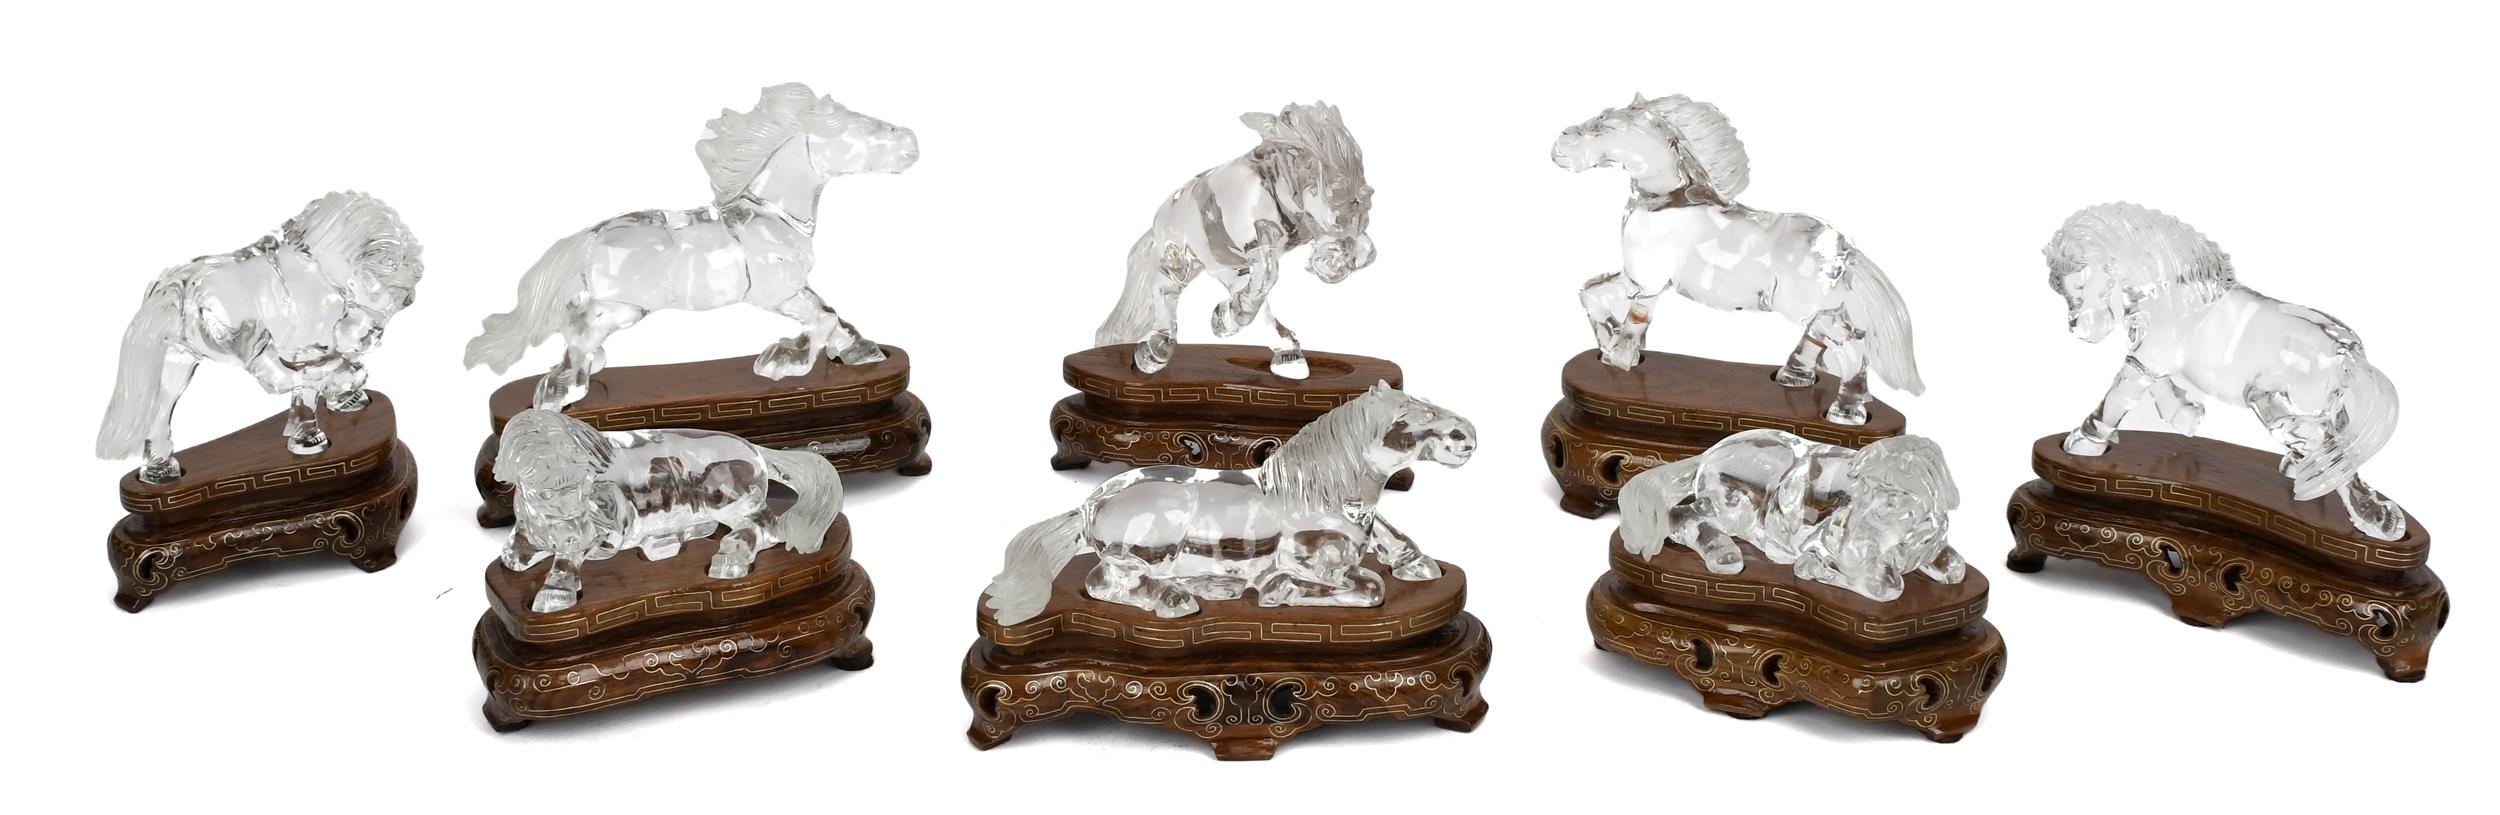 CHINESE CARVED ROCK CRYSTAL HORSES.